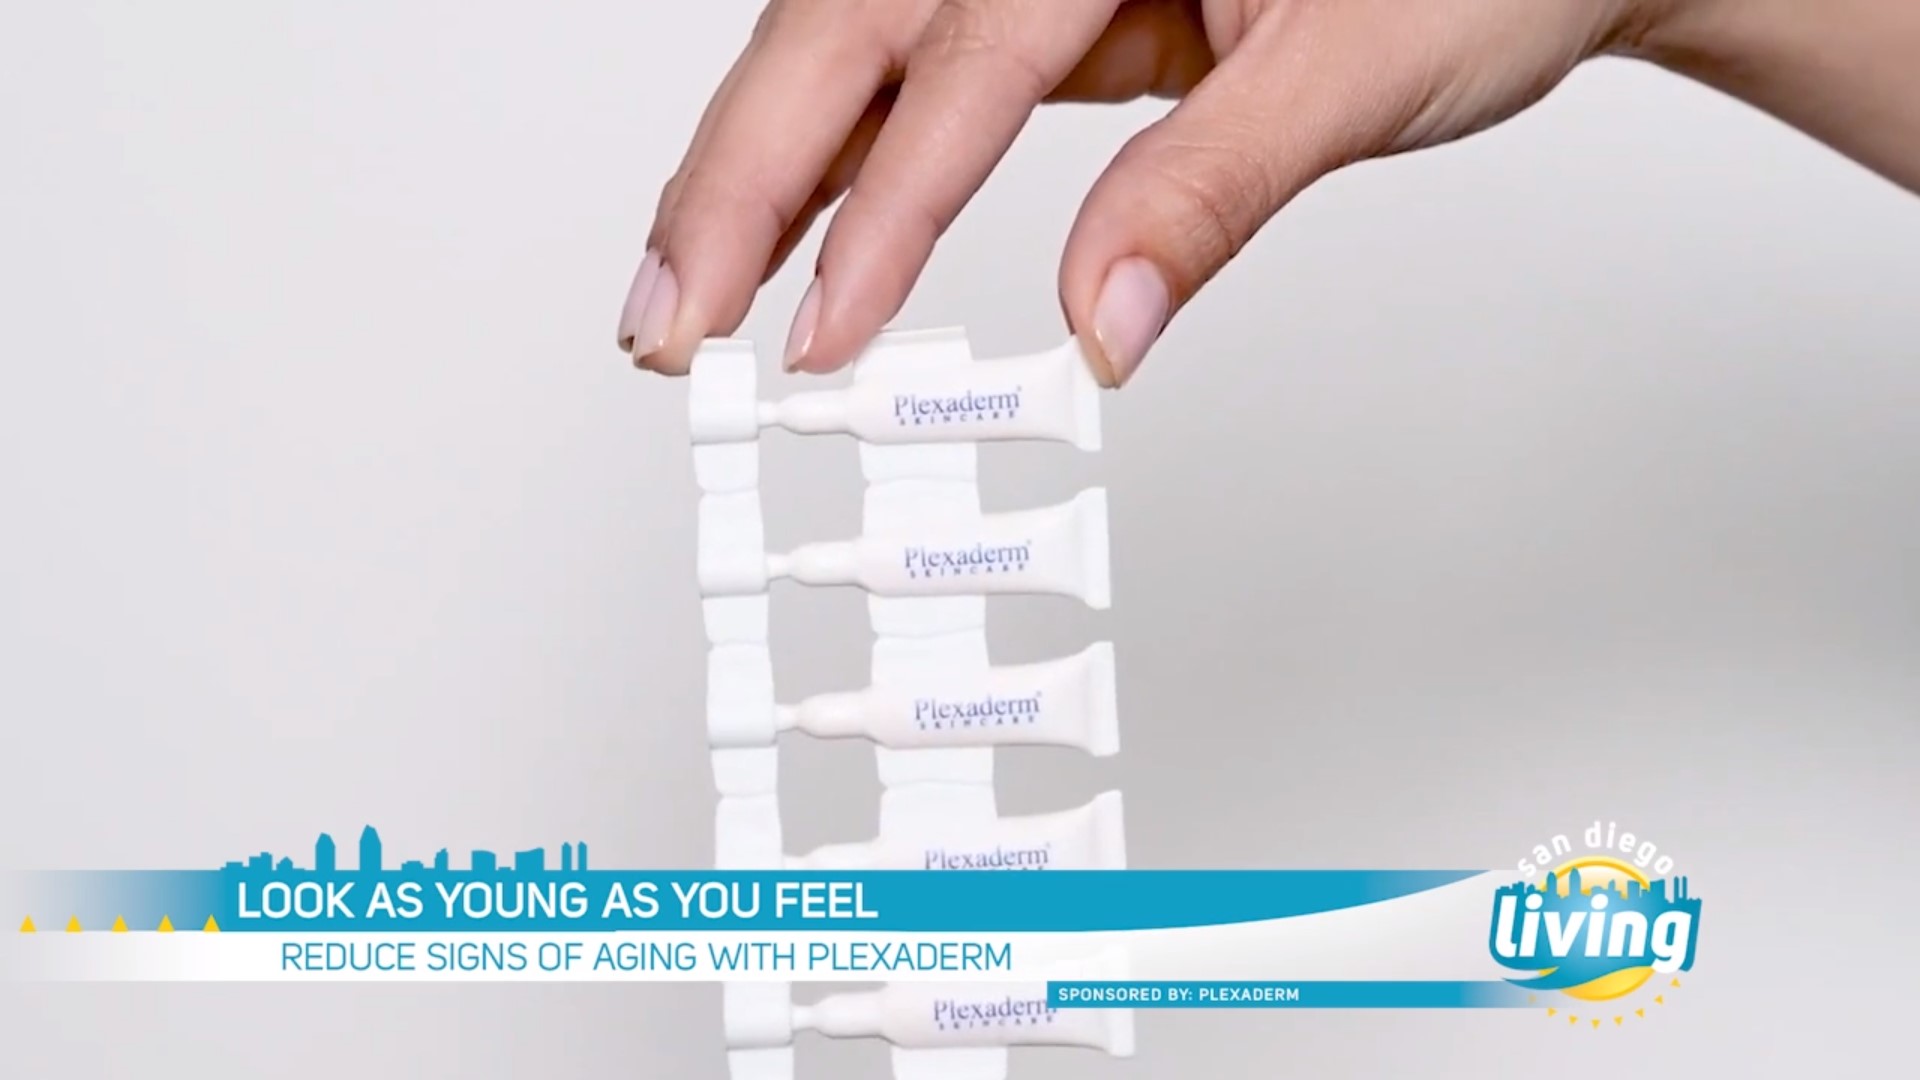 Reduce Visible Signs of Aging with Plexaderm. Sponsored by Plexaderm